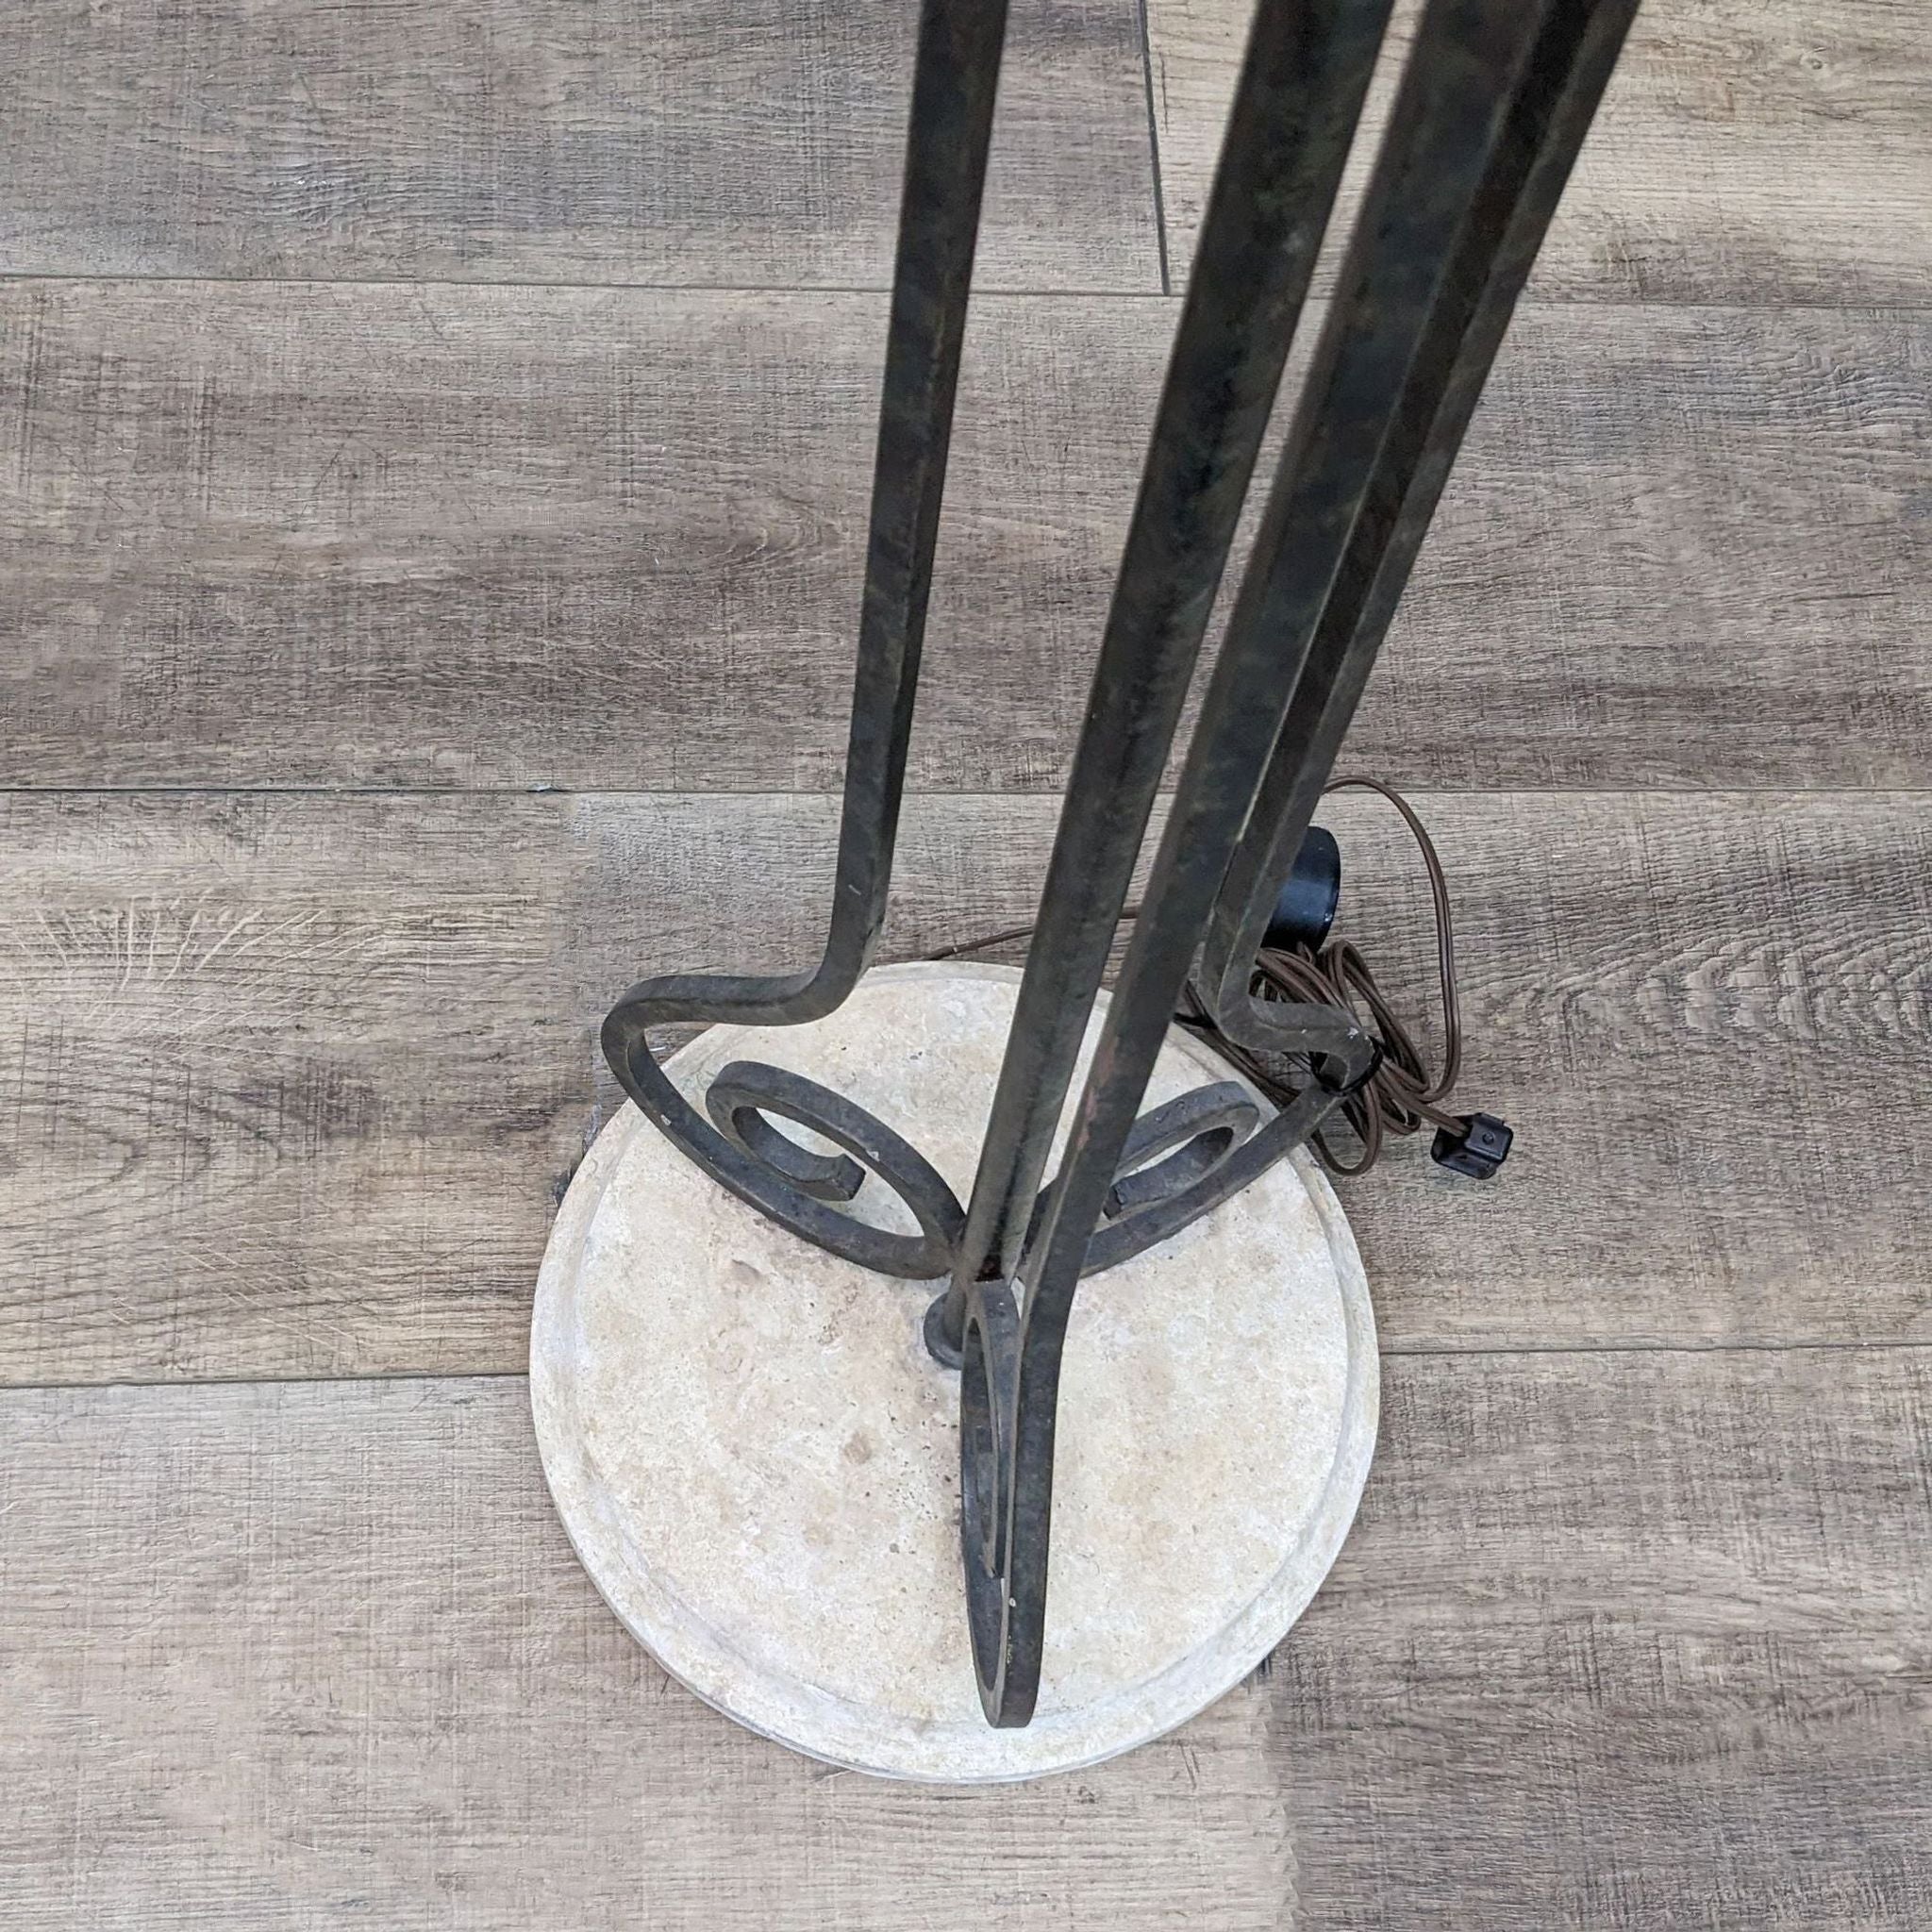 Top-down view of a Reperch brand floor lamp base with twisted metal design on wooden floor.